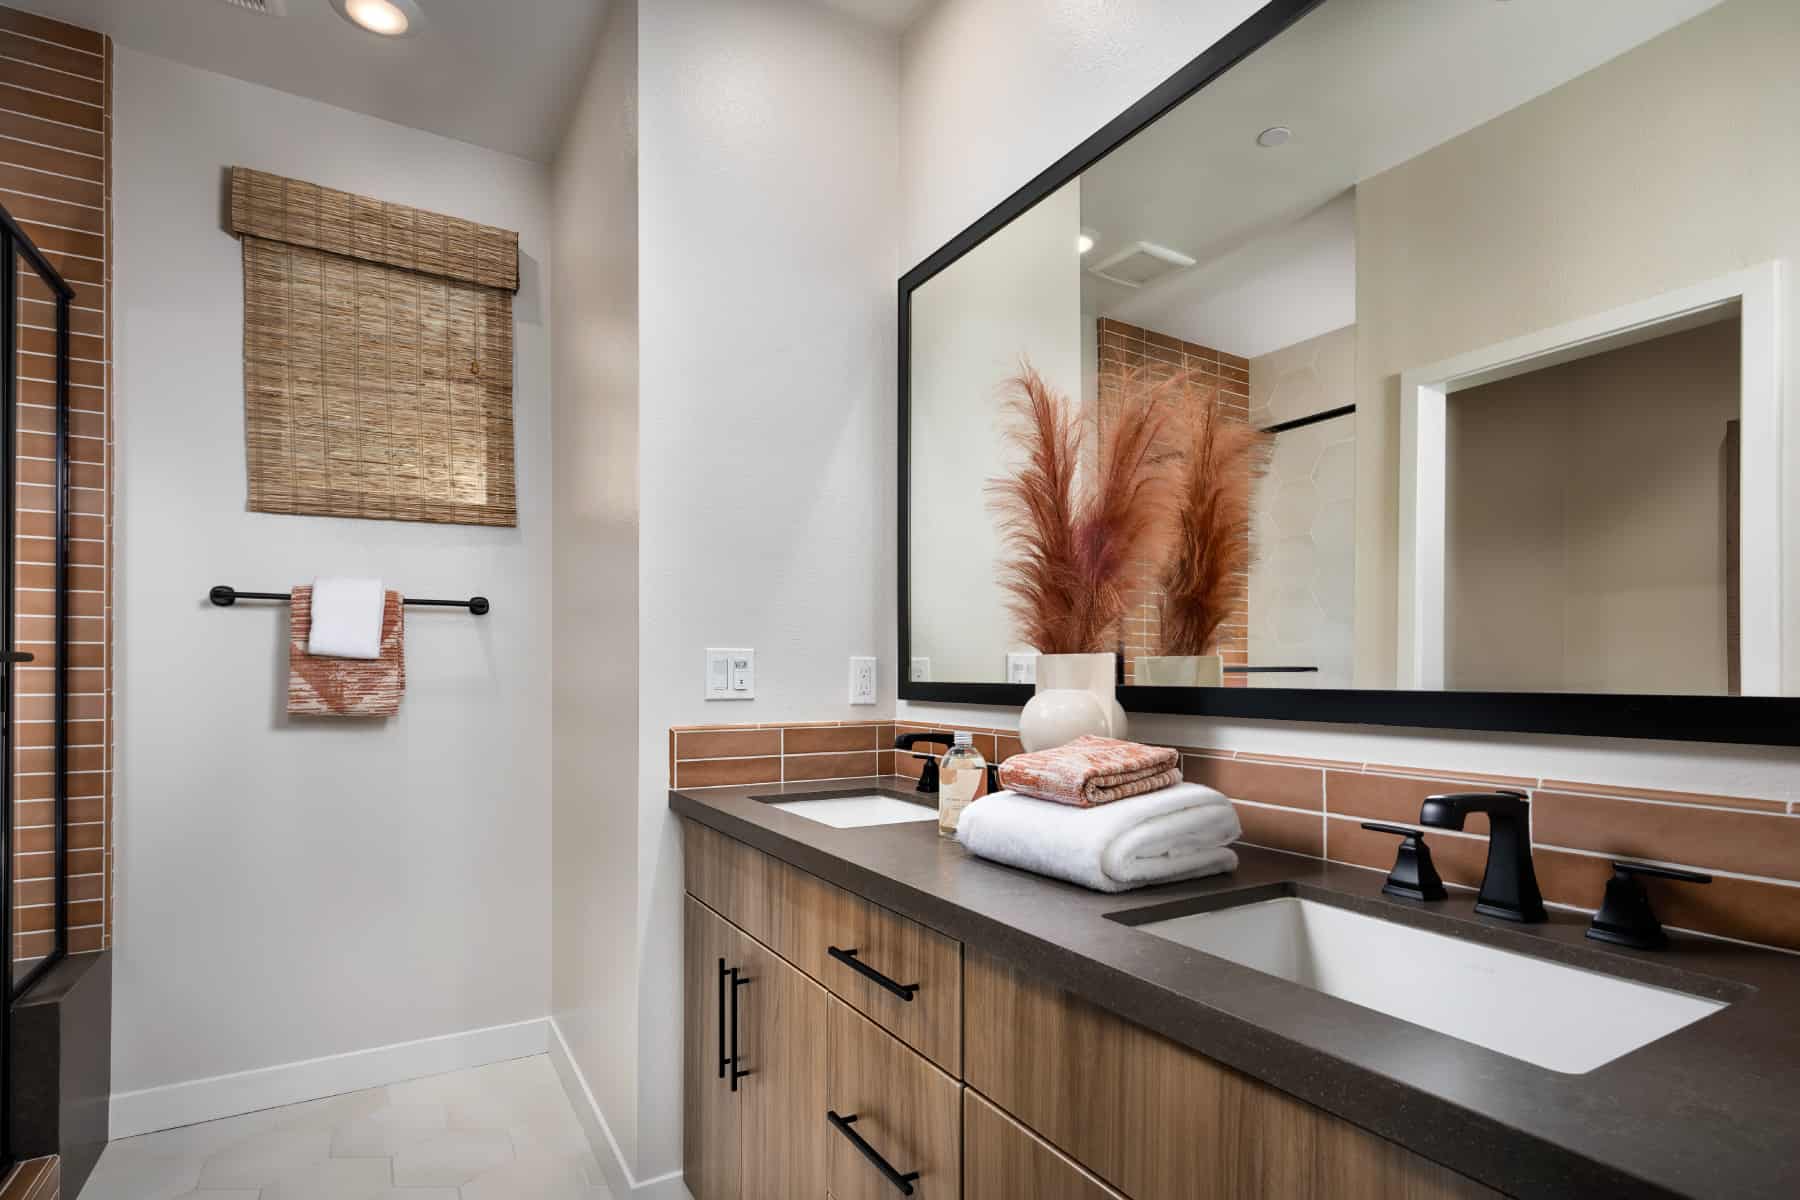 Primary Bath at Plan 3 of Belmont by Melia Homes in Cypress, CA